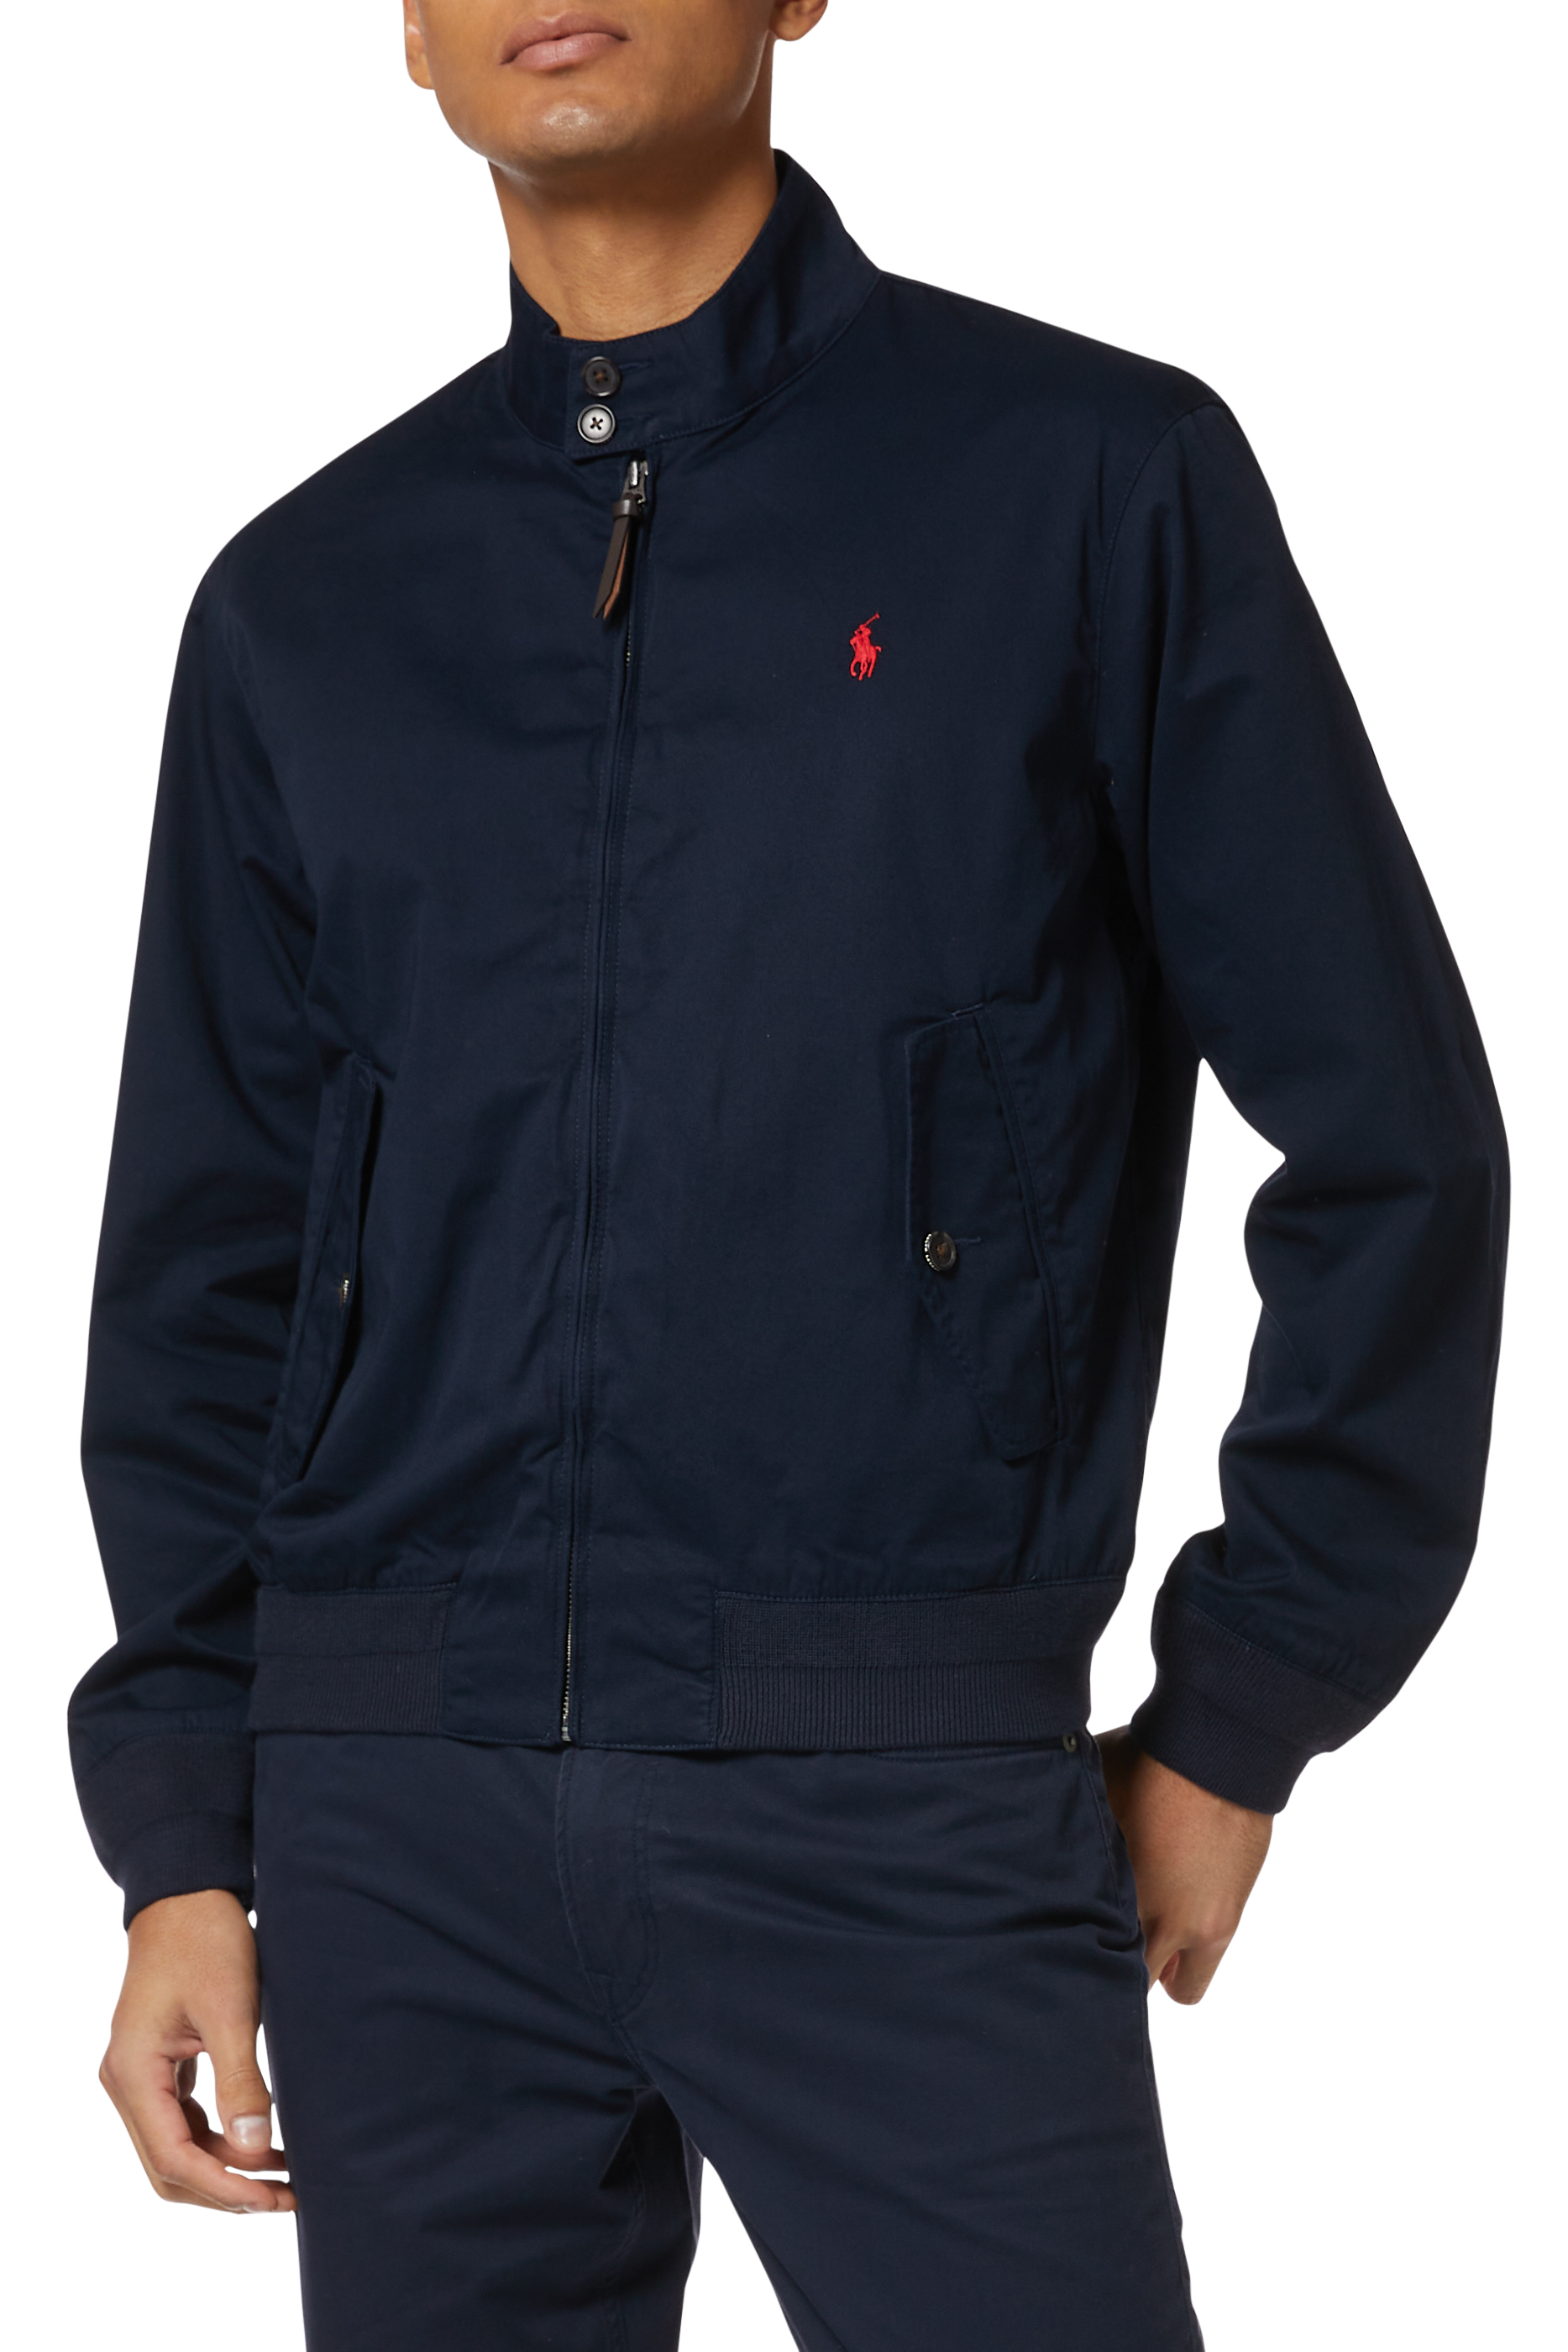 Buy Polo Ralph Lauren Puffer Jacket - Mens for AED 740.00 Technology ...